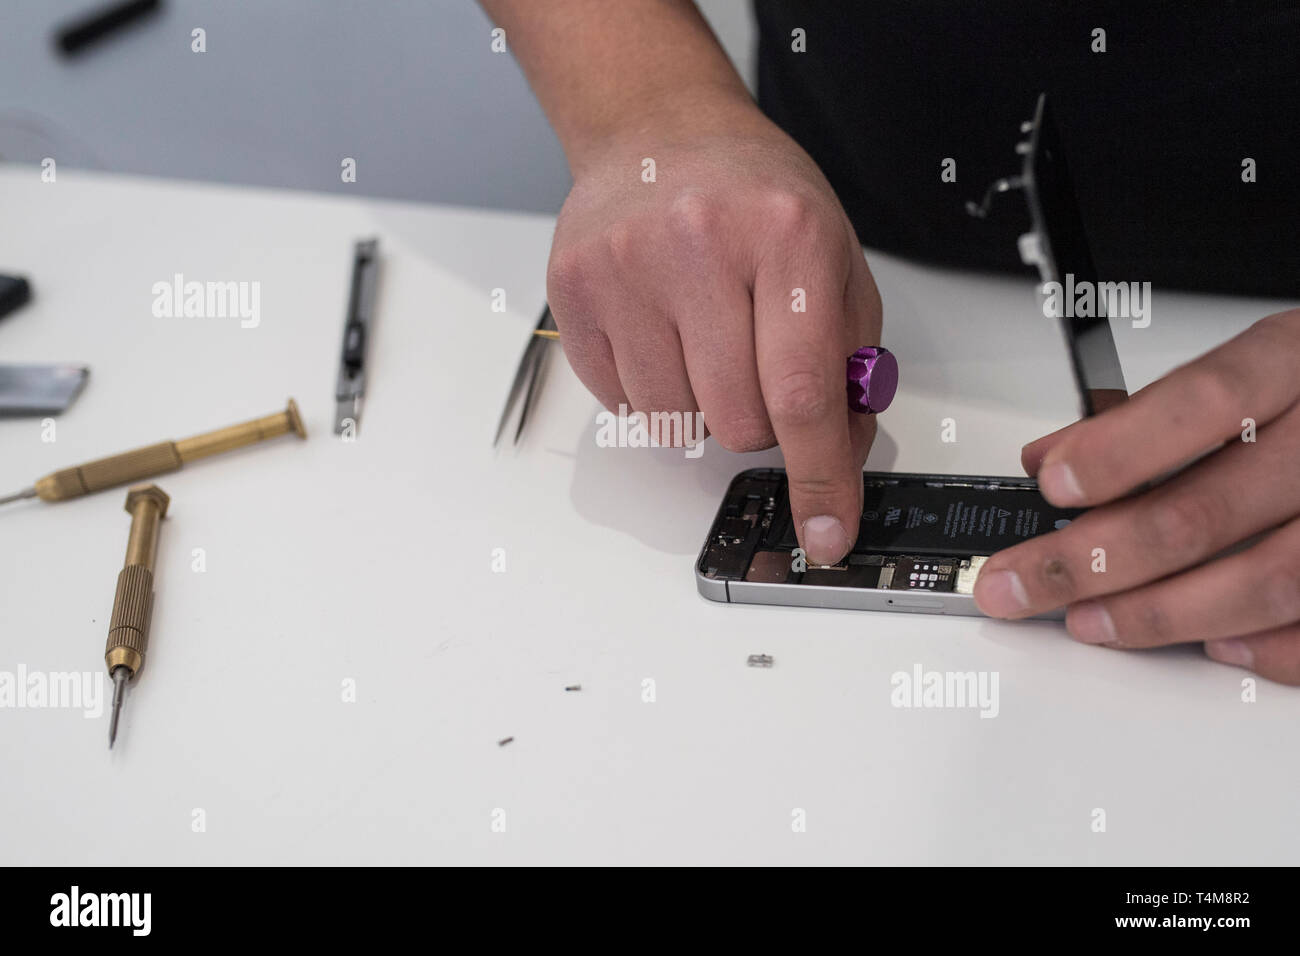 Changing a battery on a iphone Stock Photo